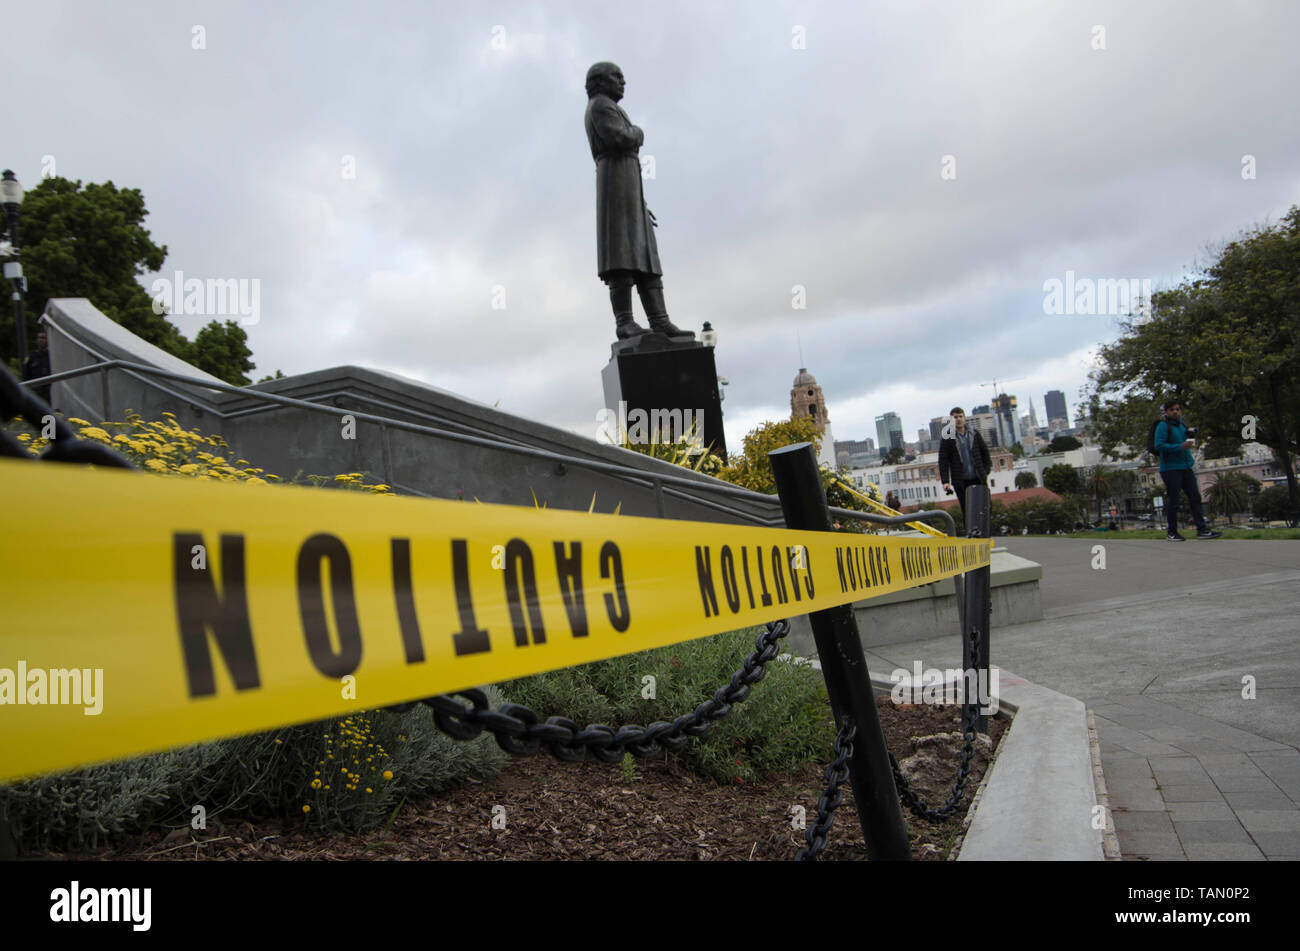 The statue of Miguel Hidalgo stands above a strand of caution tape in Mission Dolores Park in San Francisco. Stock Photo